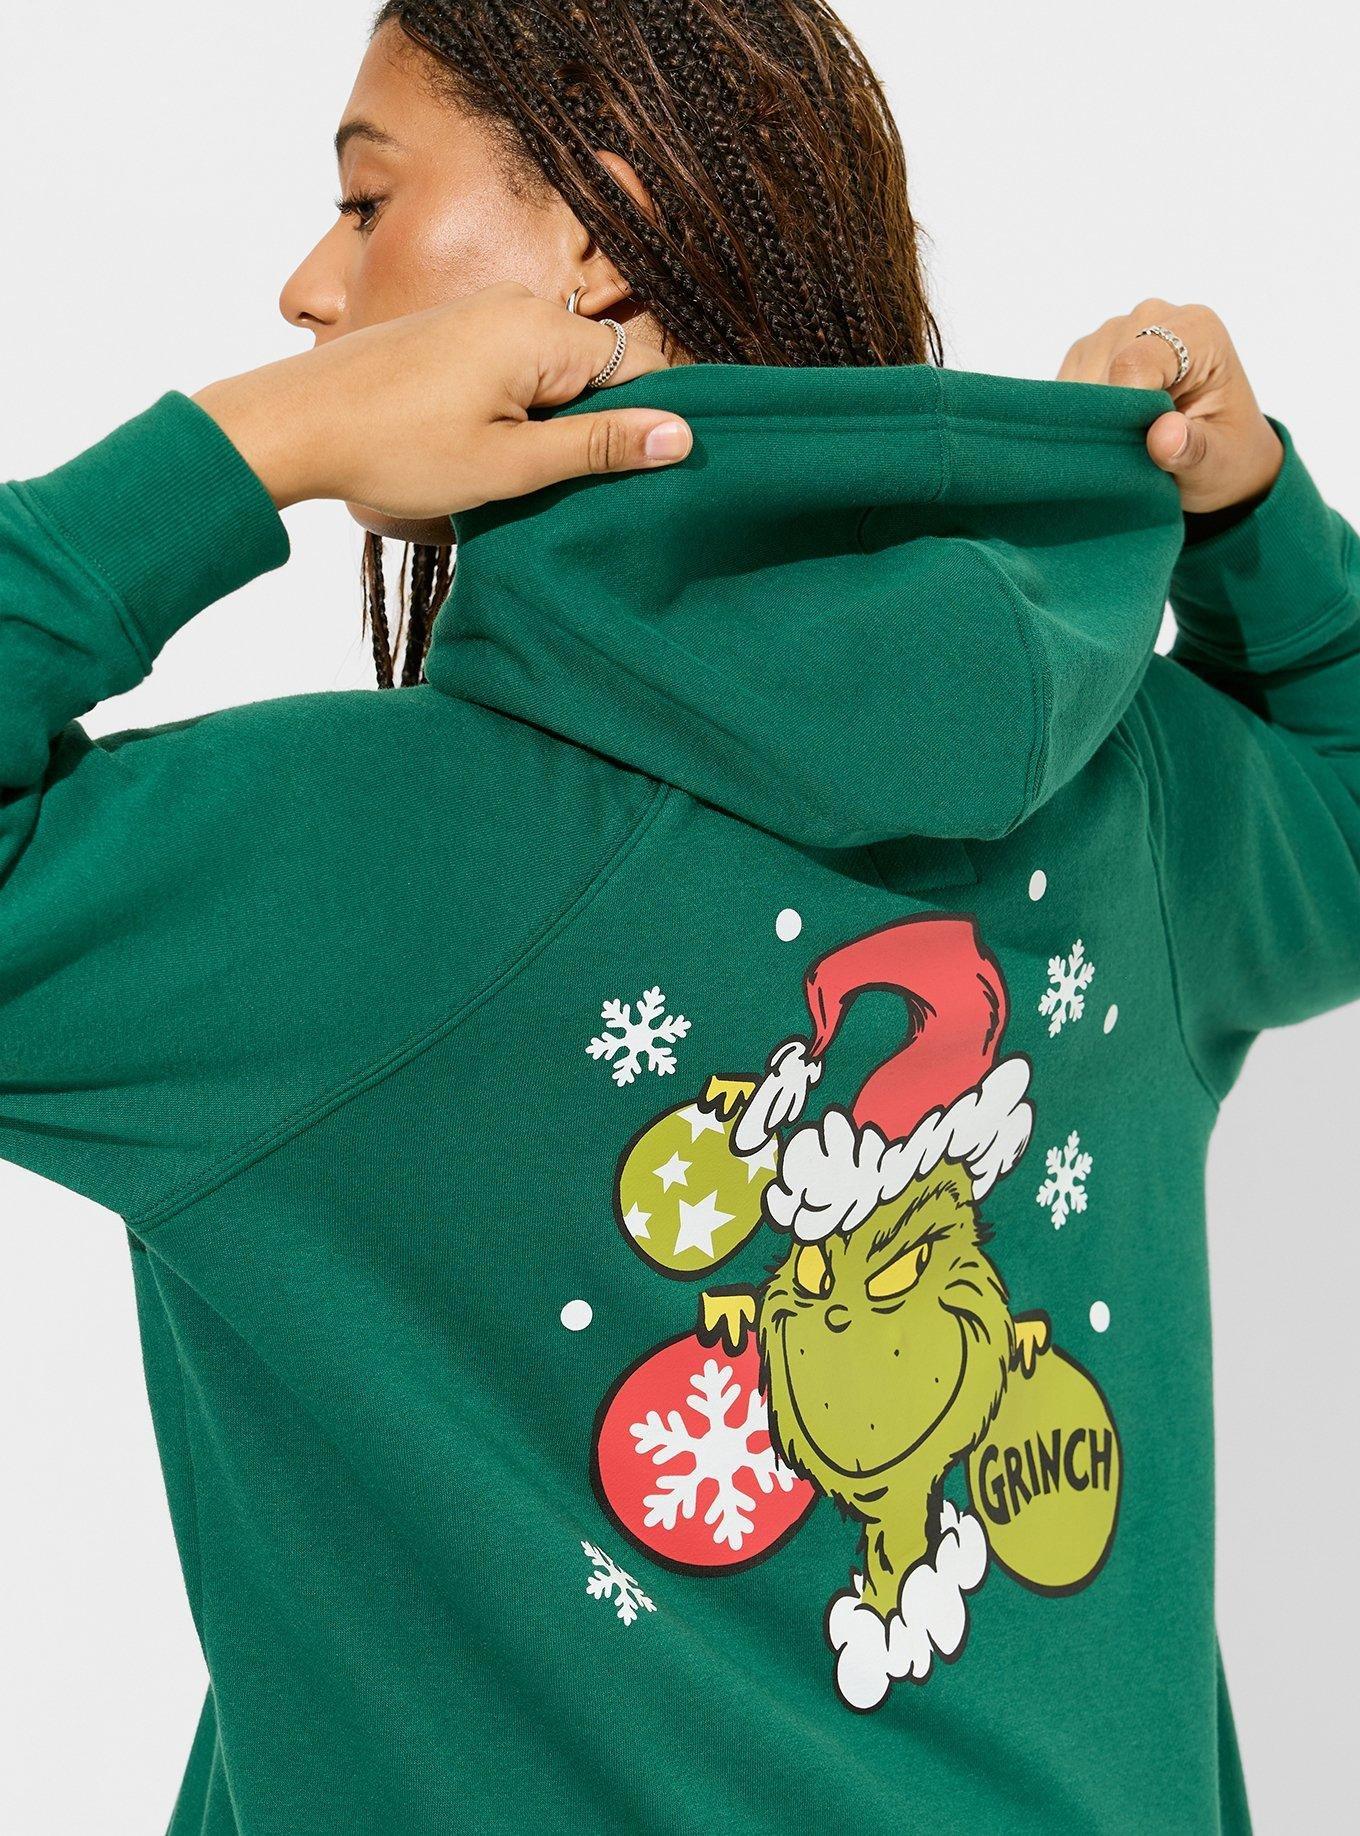 Grinch - PUMP UP Christmas v2 - The Grinch - Hoodie